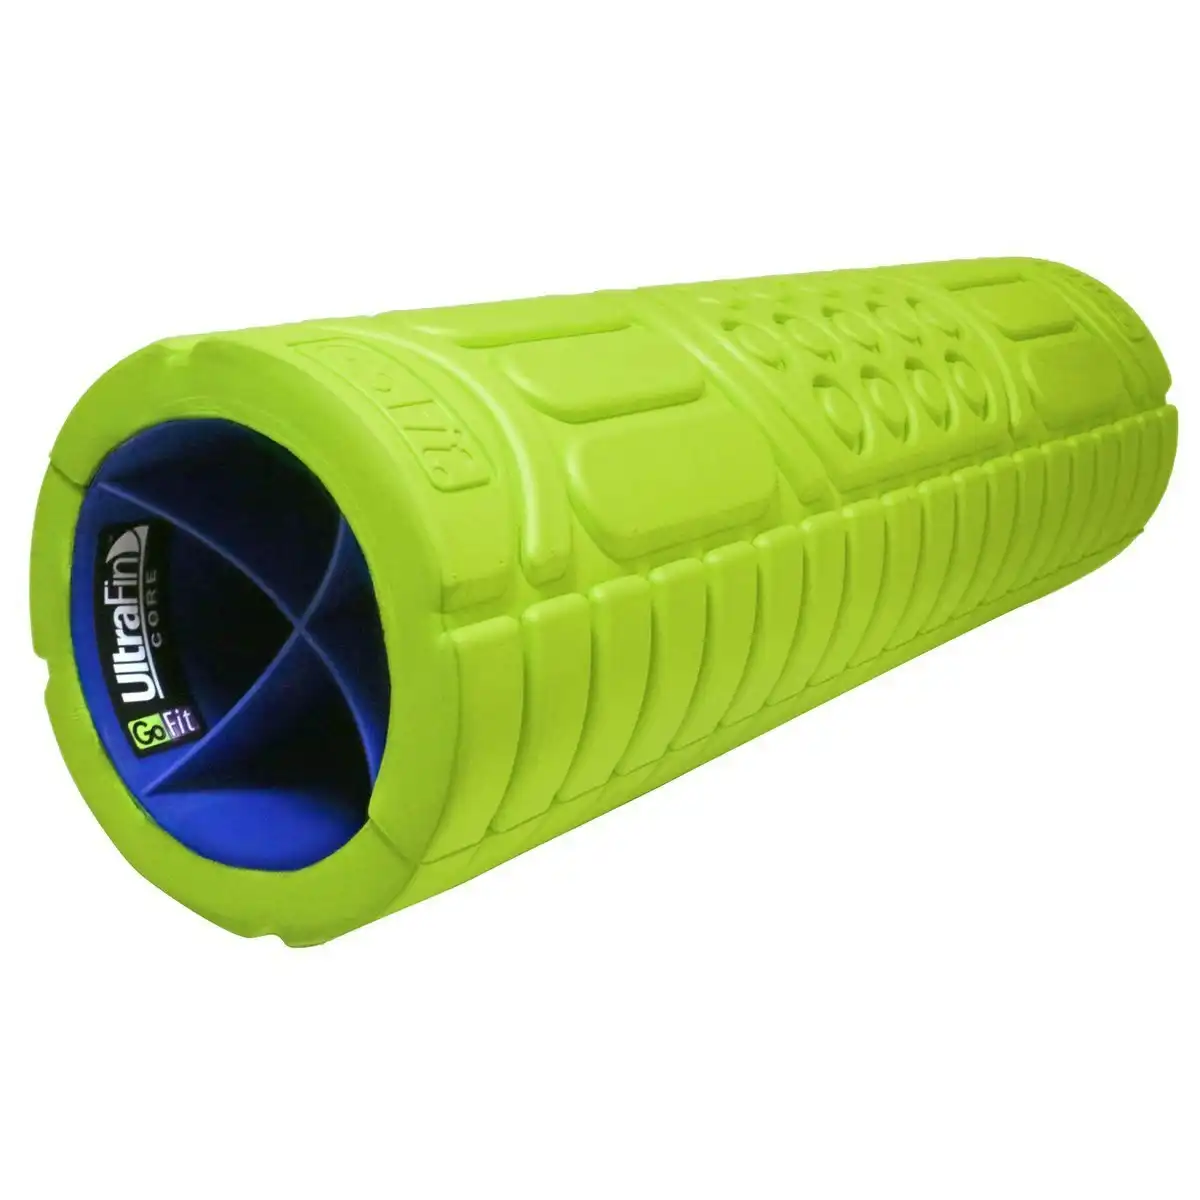 Gofit 45.7cm Sports Gym Fitness/Muscle Massage Recovery Massager/Roller Green